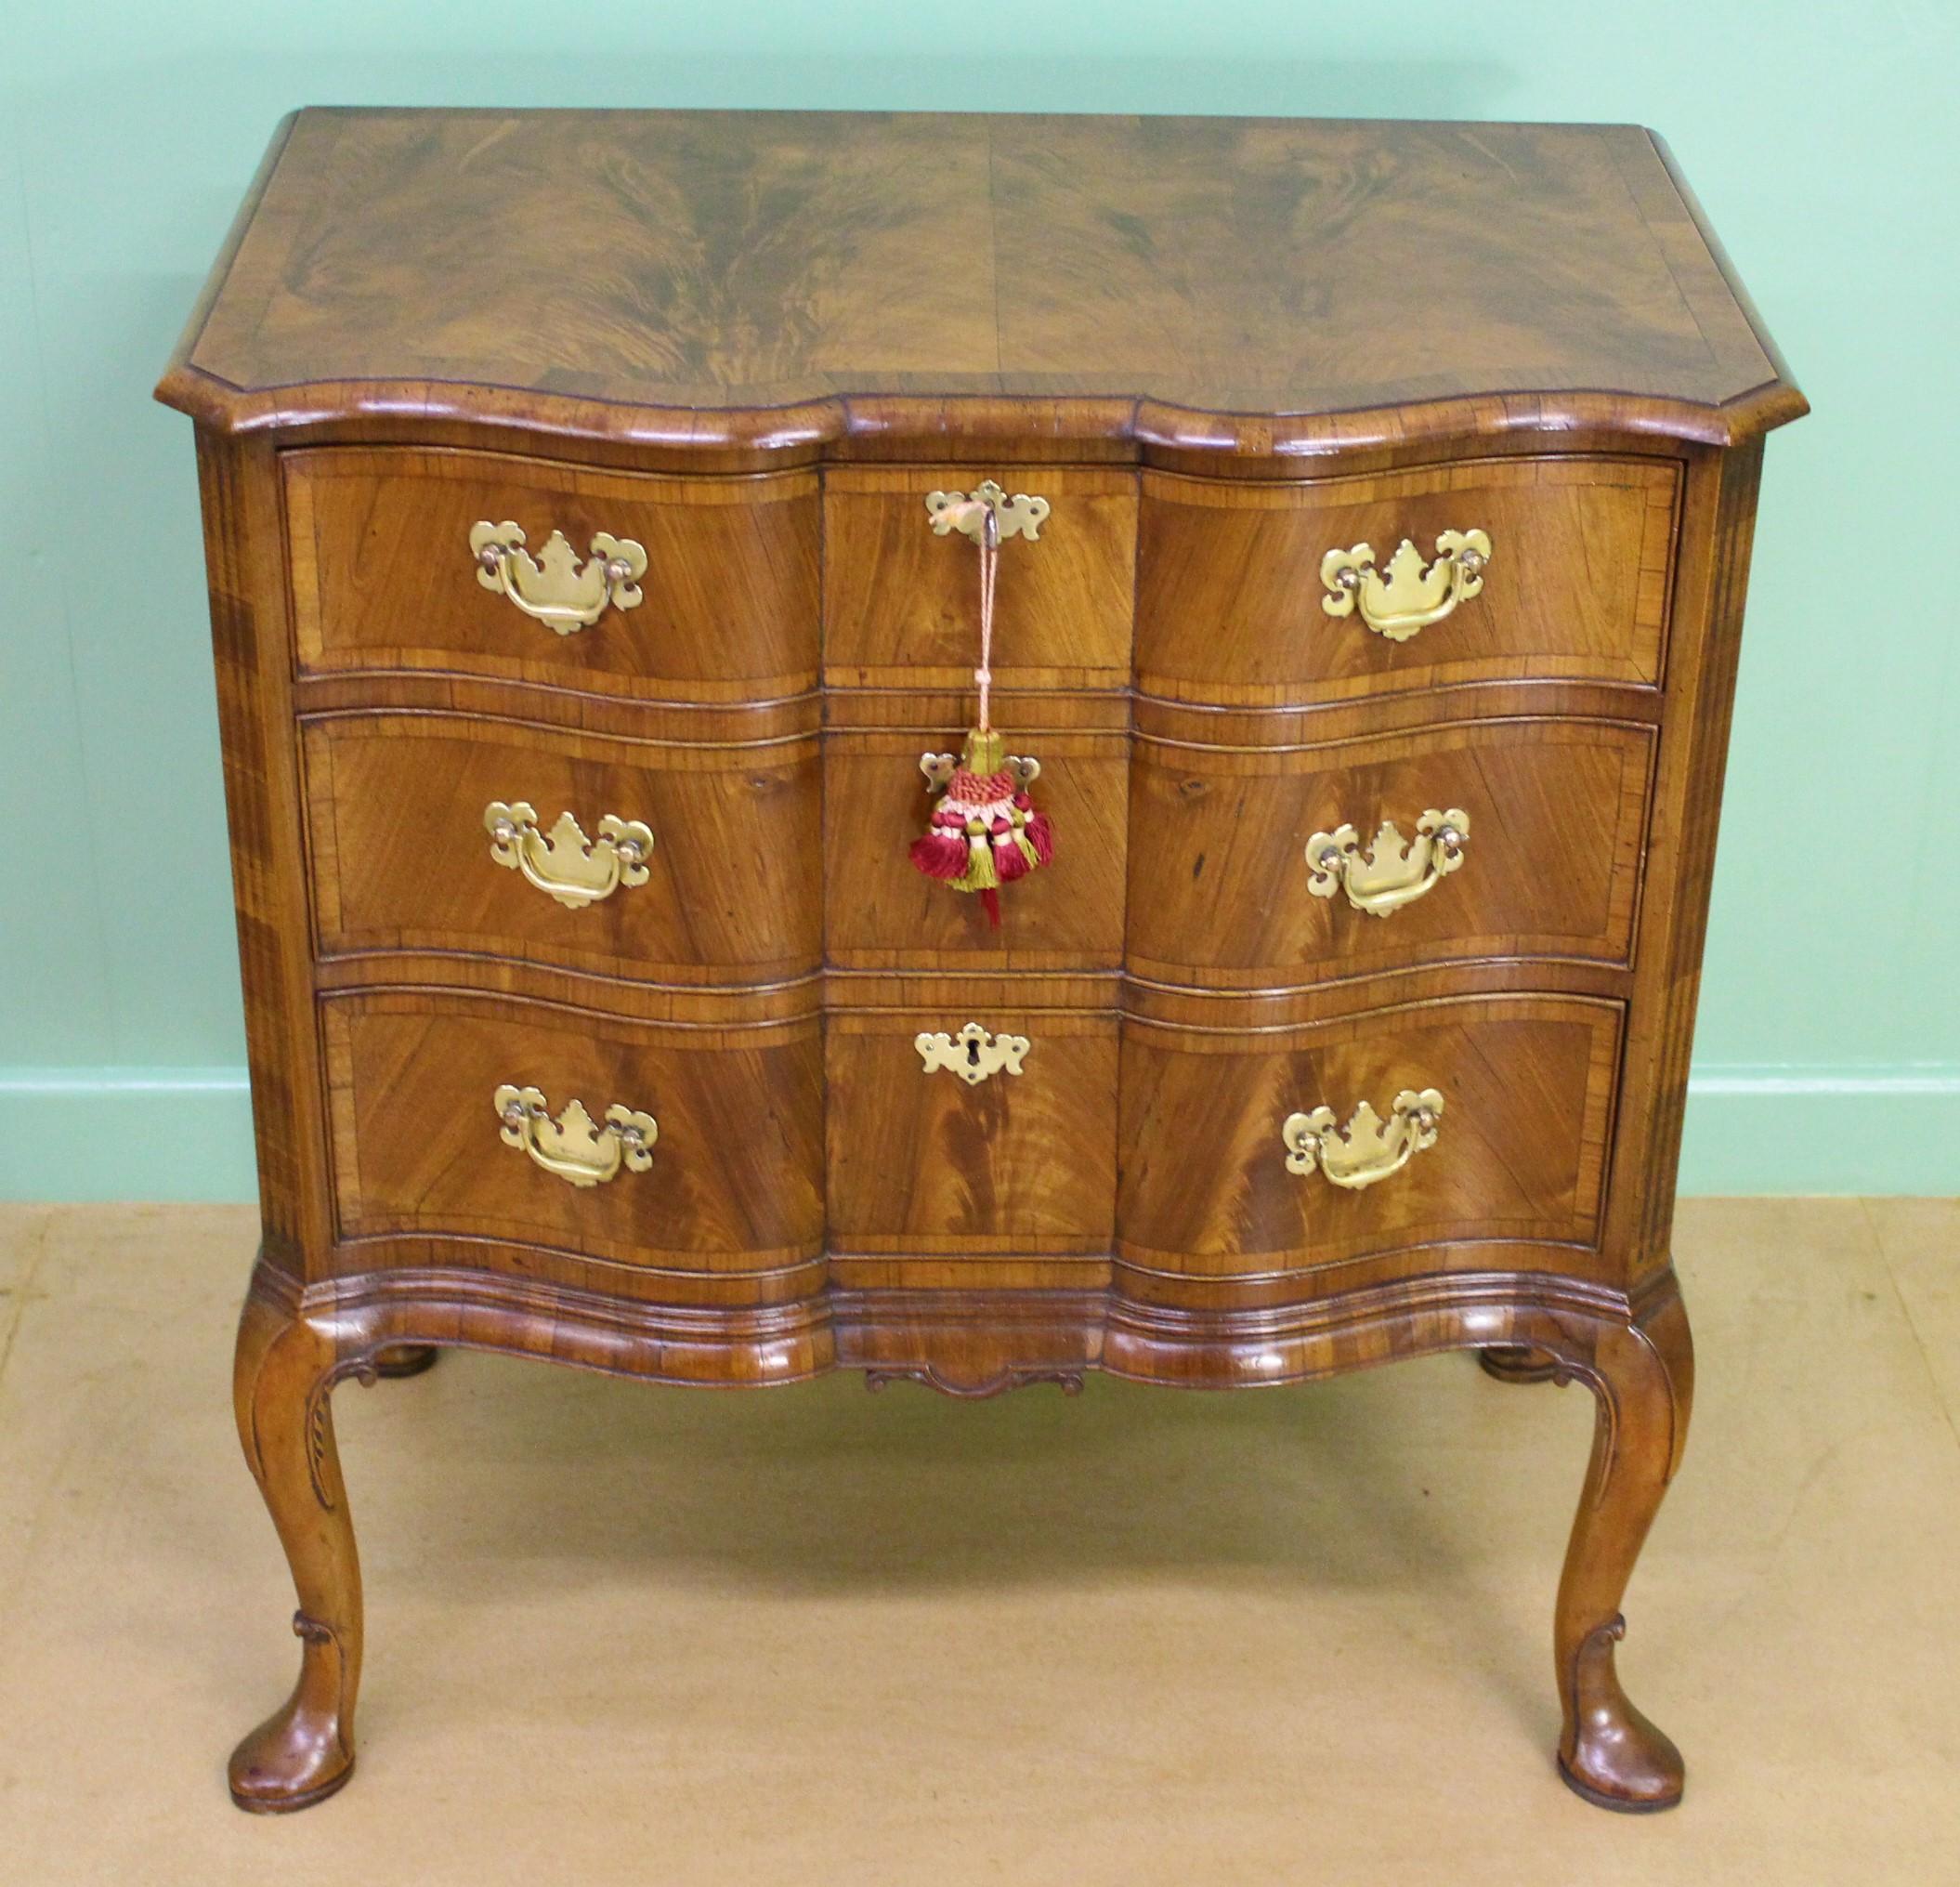 The finest quality burr walnut chest of drawers by the renowned maker Charles Tozer of London. Of serpentine form and cross banded throughout. With a series of 3 graduated drawers fitted with their original solid brass hardware. With canted corners